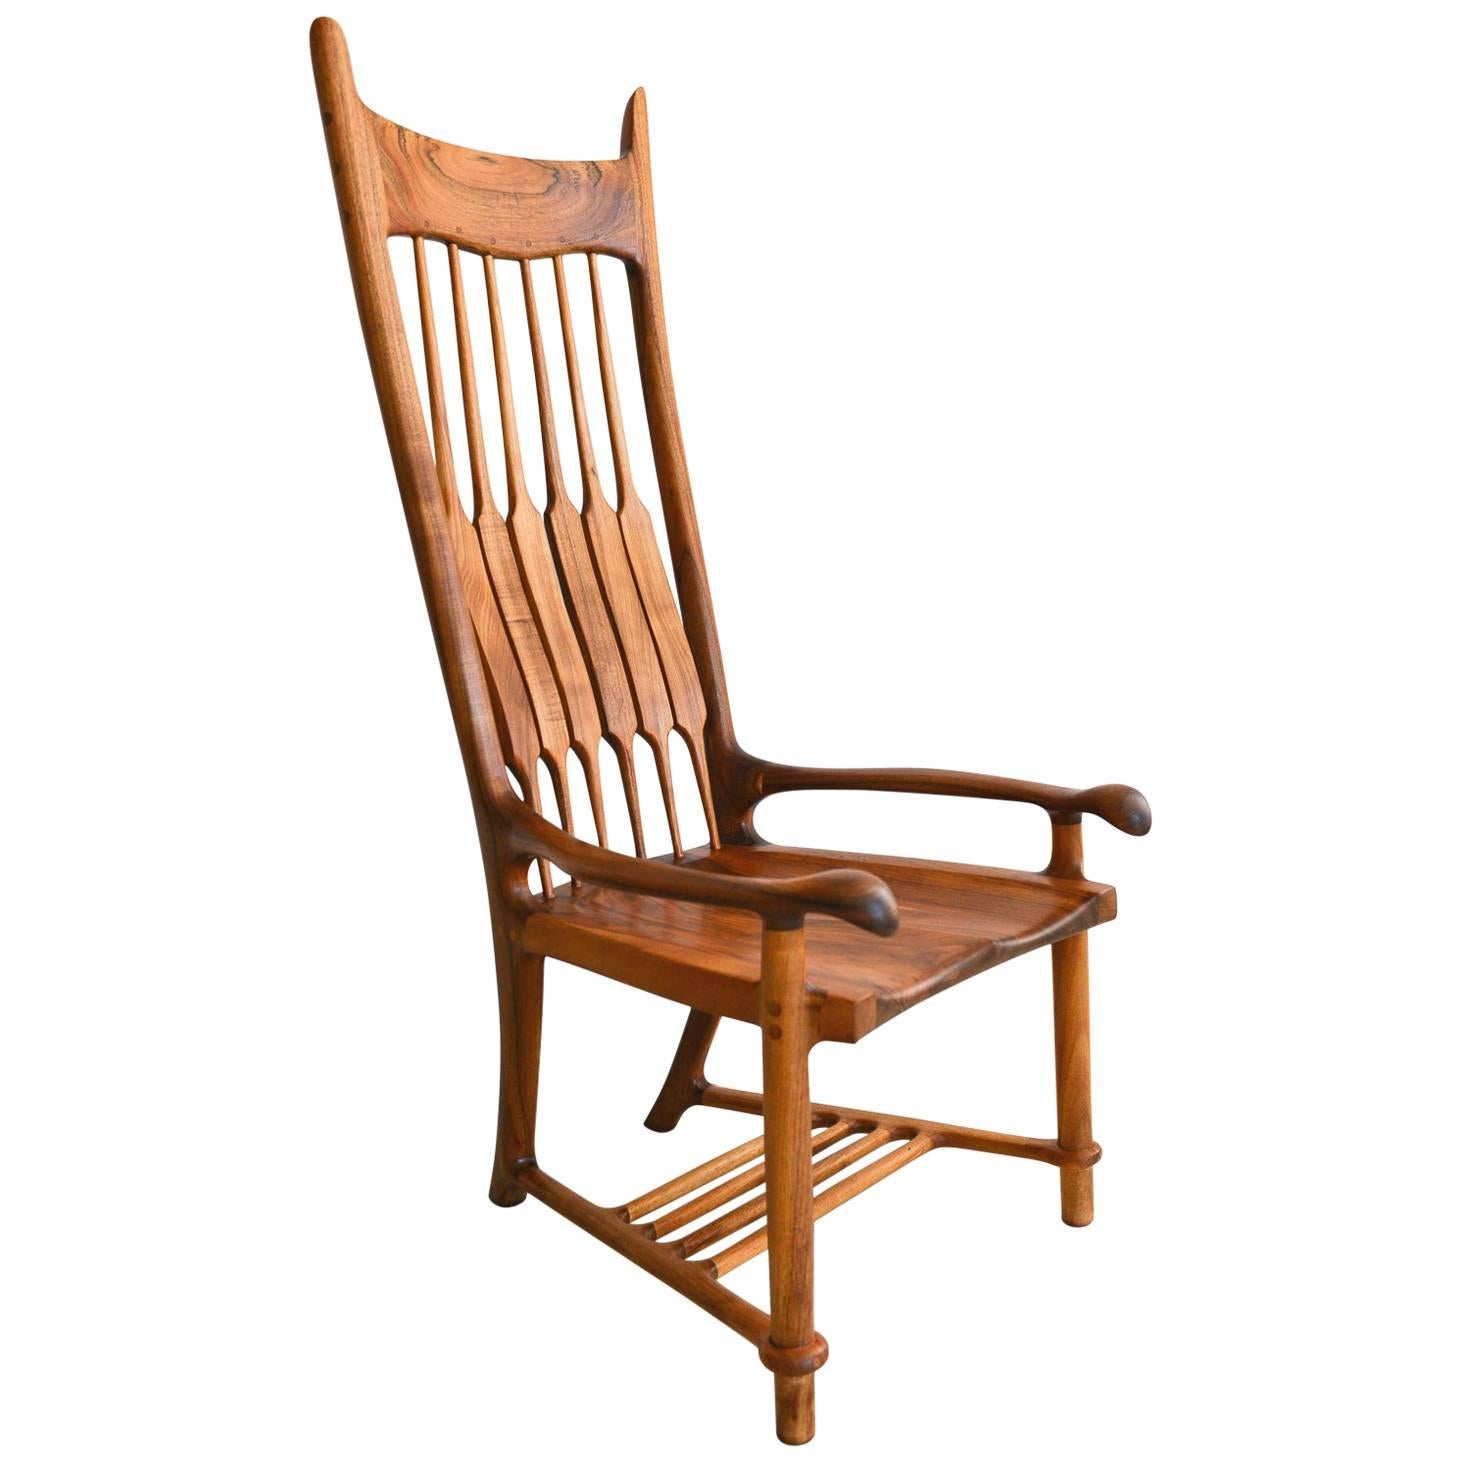 California Studio Craft Lounge Chair by Charles Jacobs